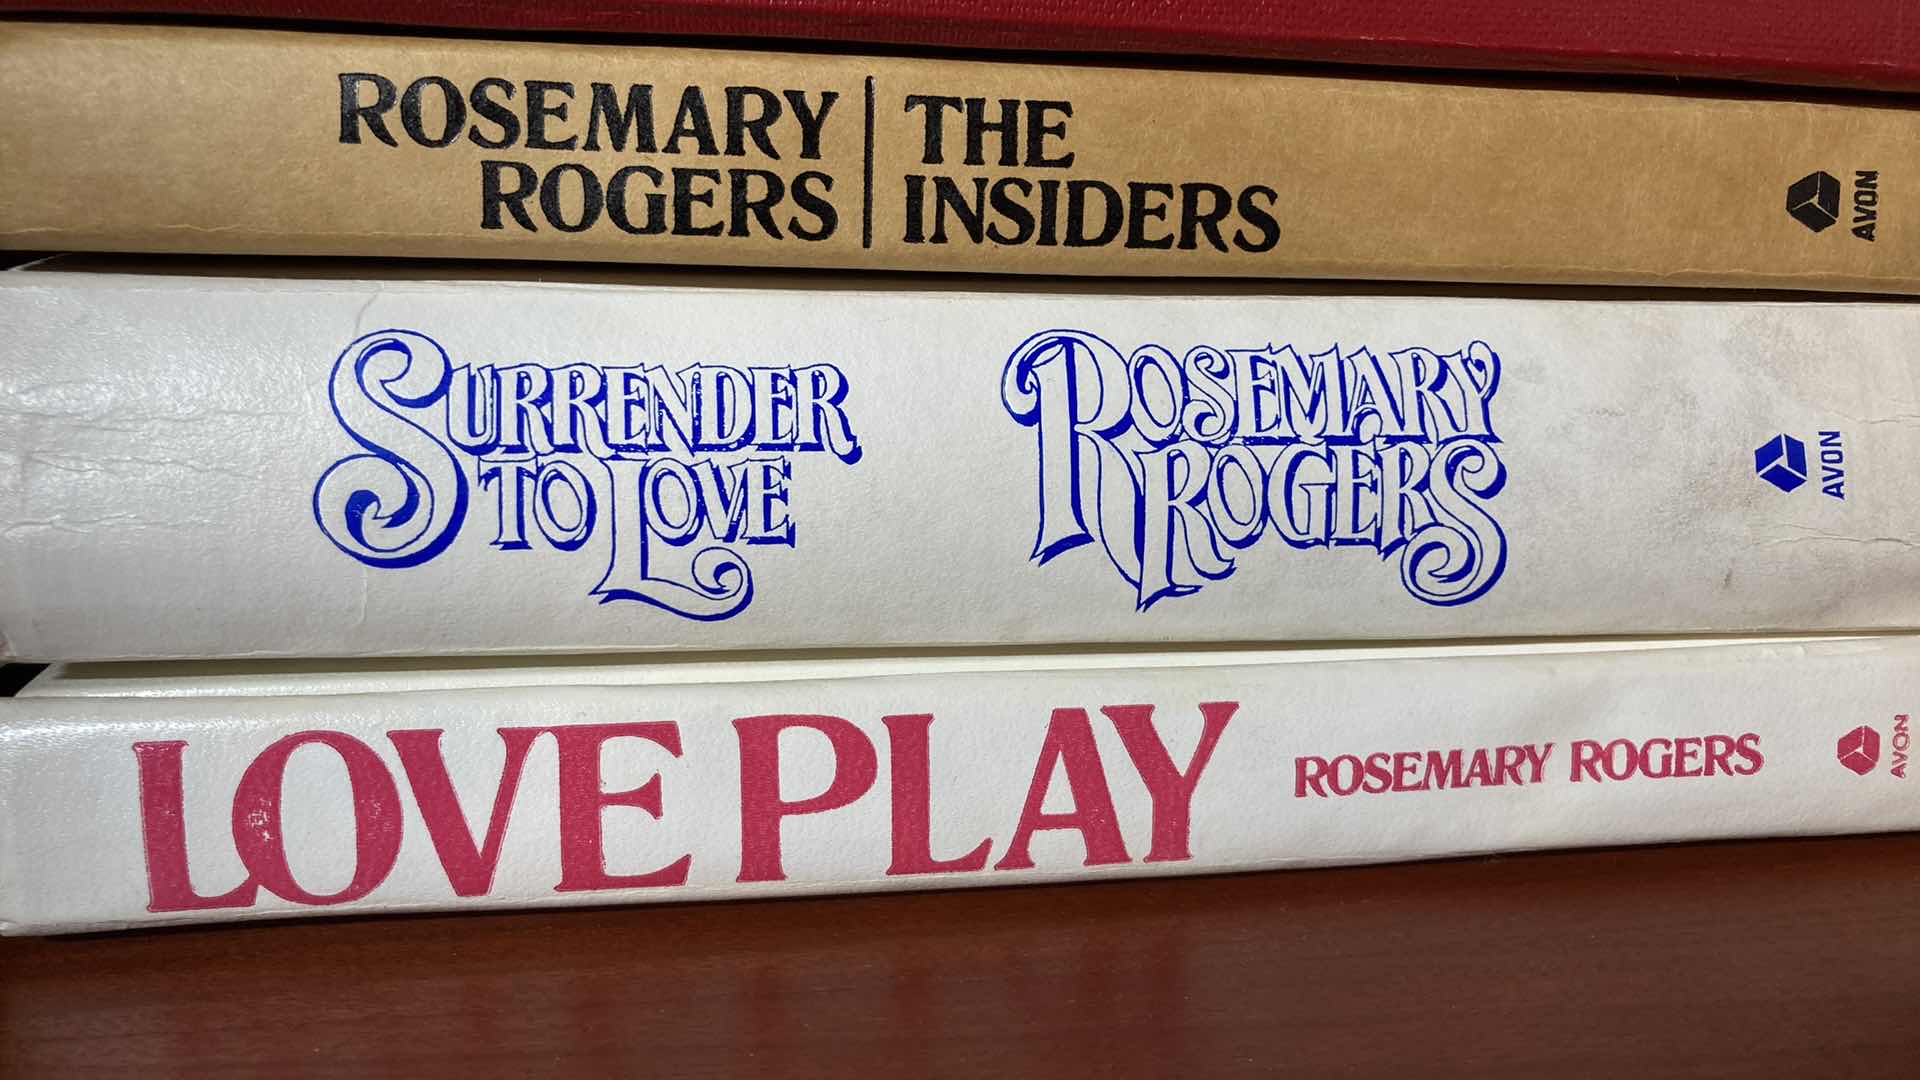 Photo 2 of ROSEMARY ROGERS LEATHER HARD COVER BOOKS (5)